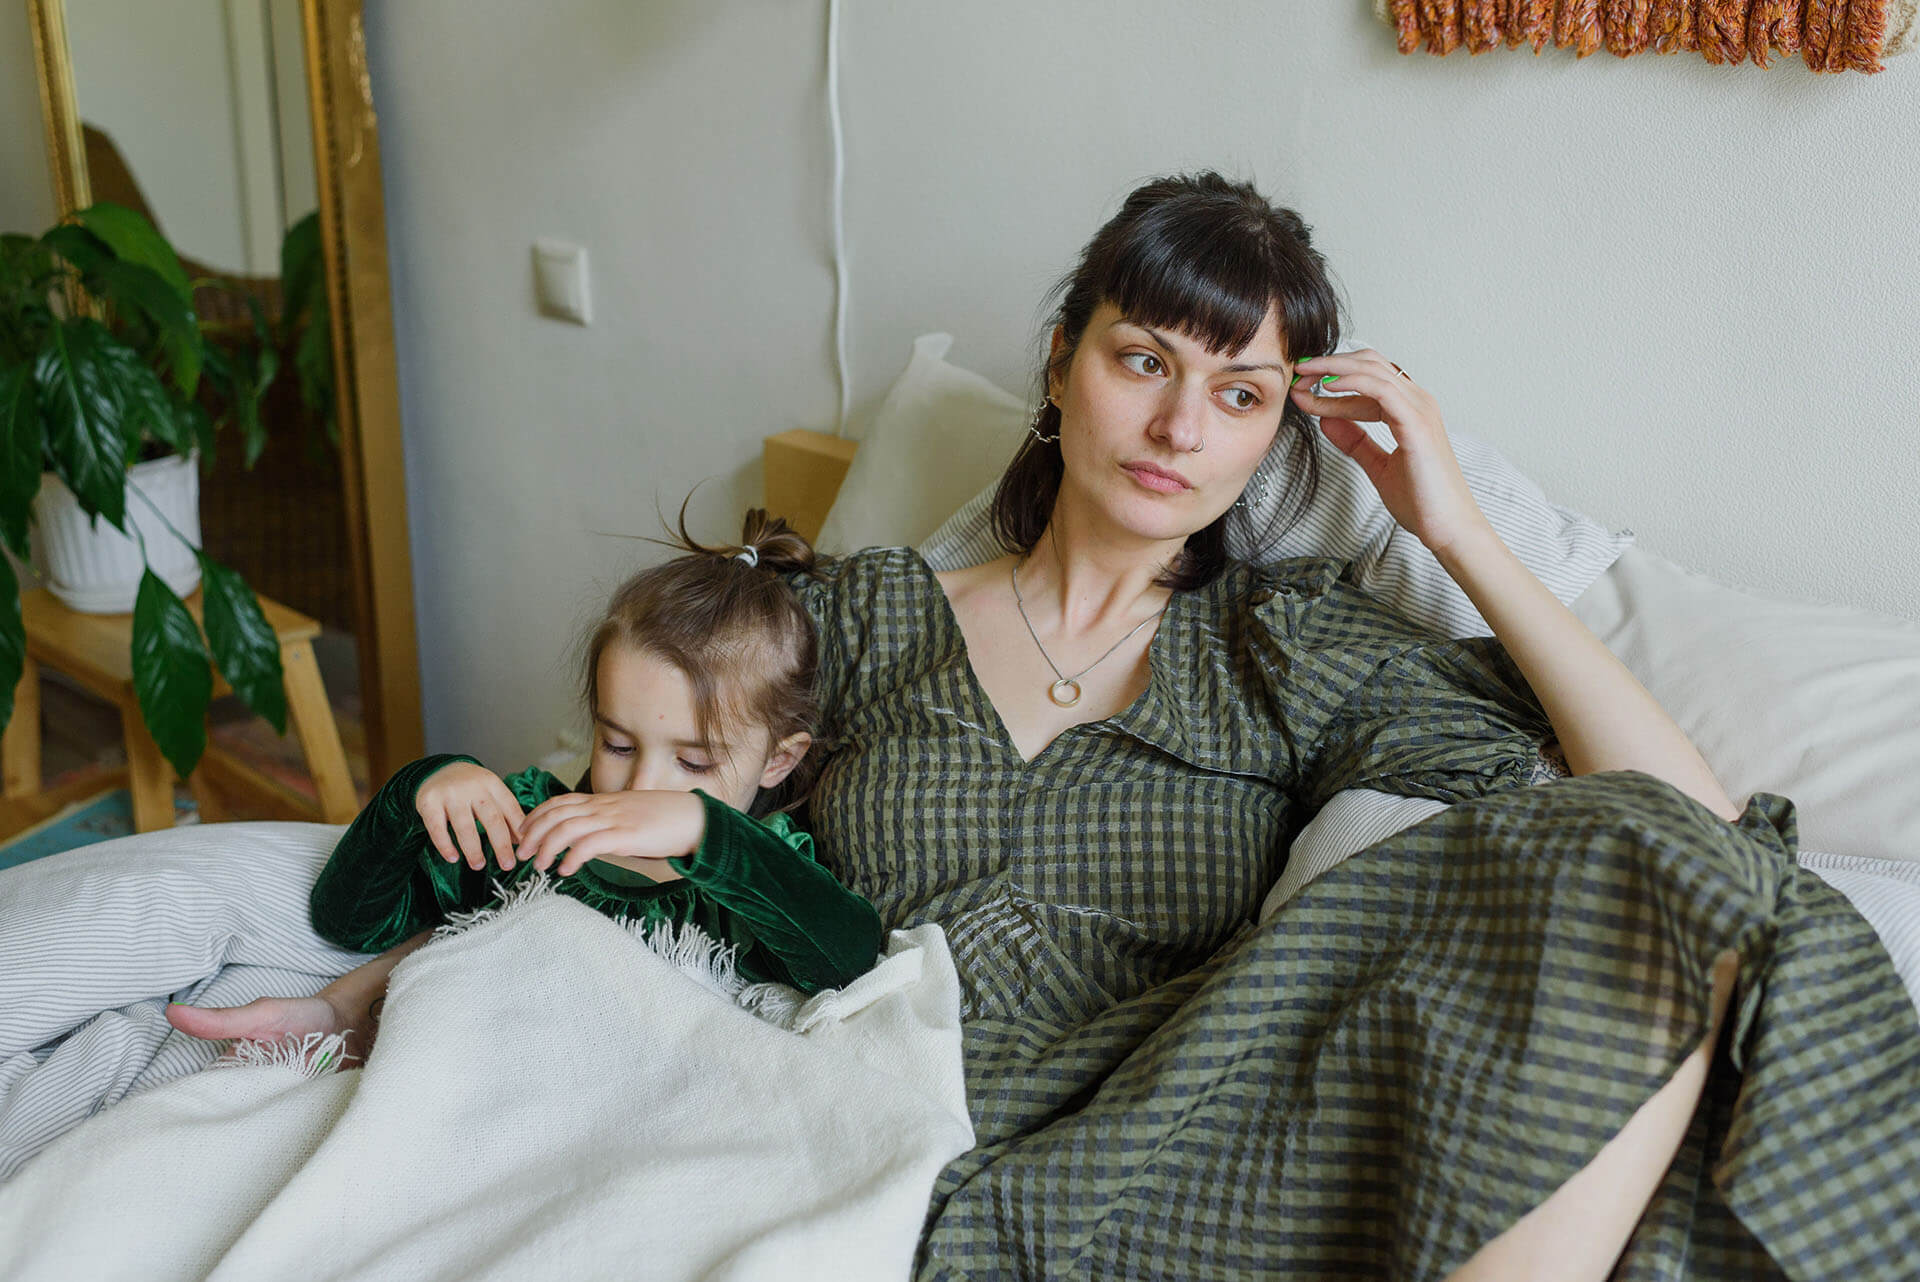 Young mom feeling stressed and exhausted sitting with her young daughter on the bed.